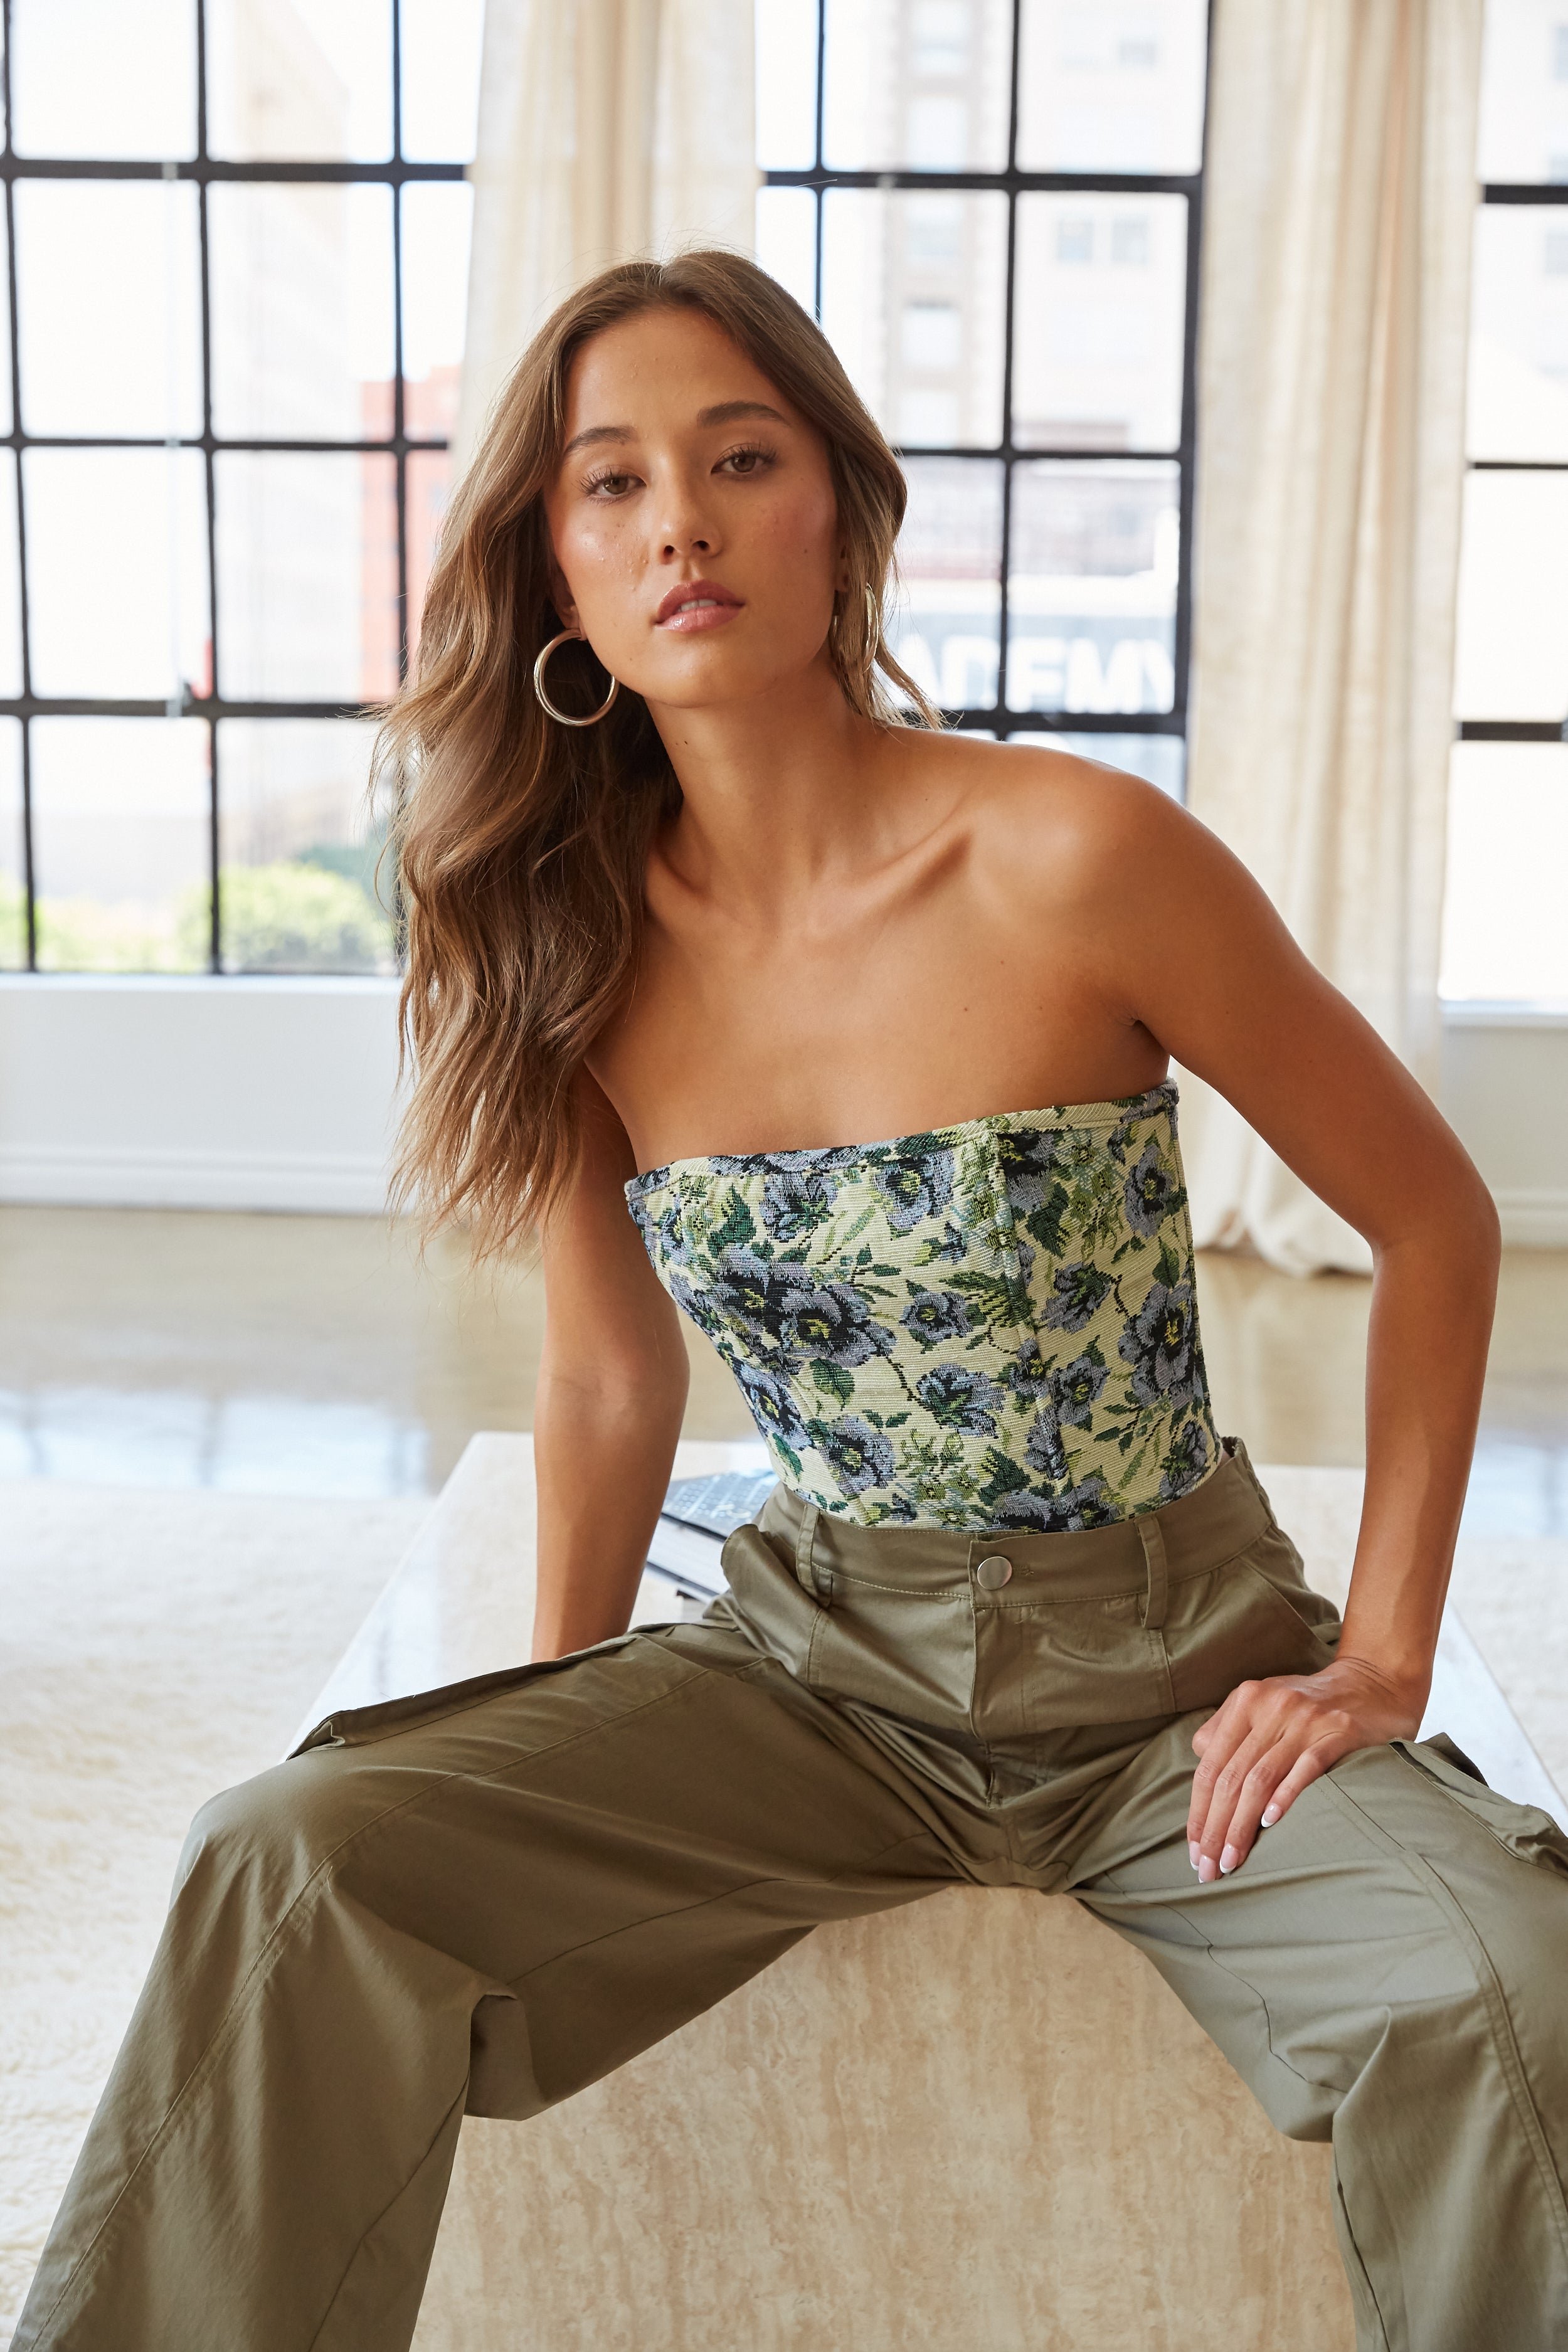 wilma-petunia-floral-blue-and-green-tapestry-corset-top-thalia-army-green-cargo-pants-033_b53fd631-e6cd-4a8d-8c13-328f3ea5898a.jpg